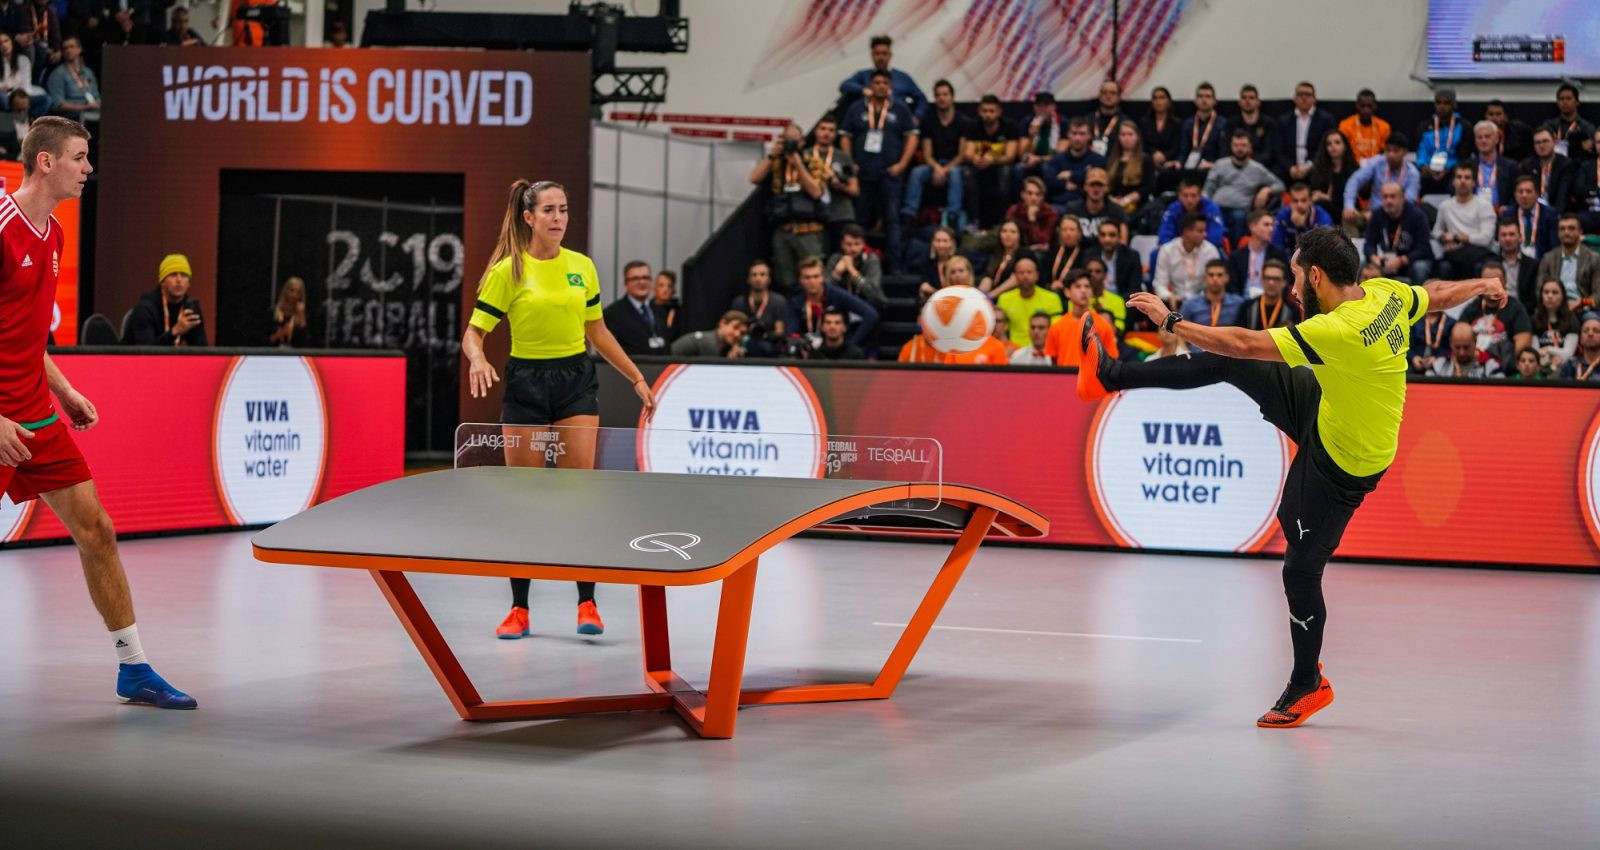 The 2020 Teqball World Championships have been postponed due to COVID-19 ©FITEQ